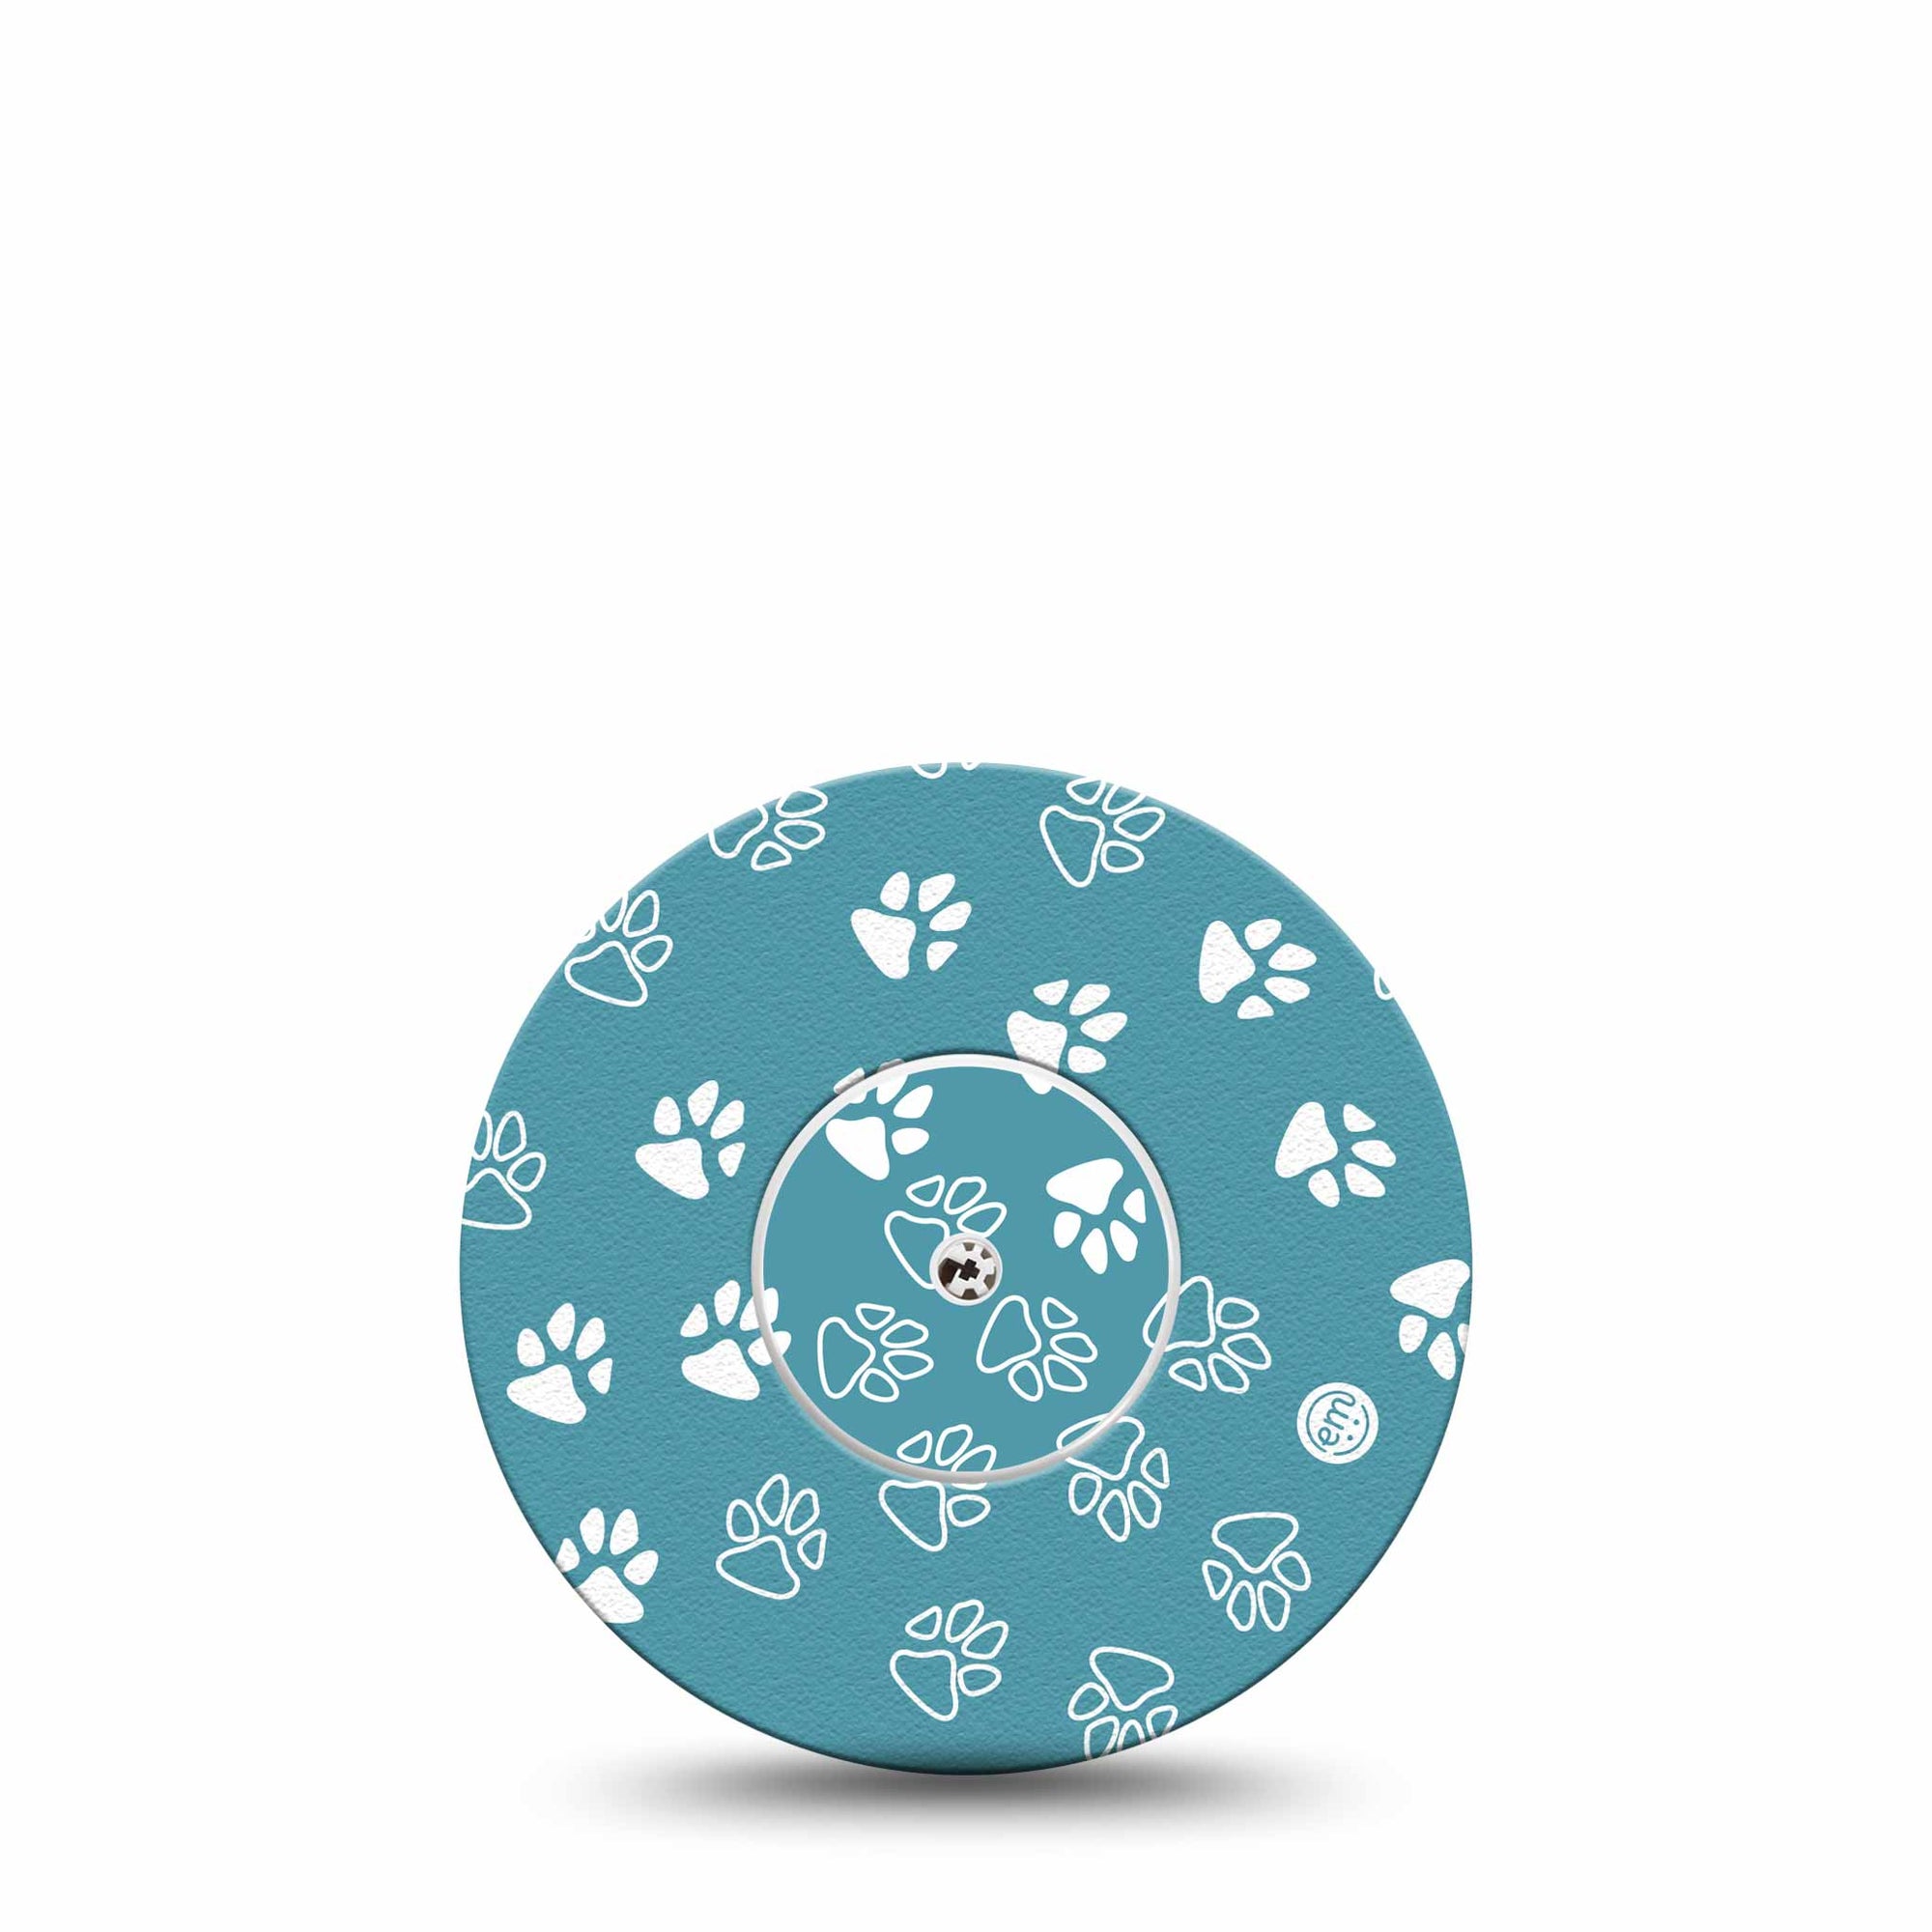 ExpressionMed Pawprint Libre Transmitter Sticker with Tape